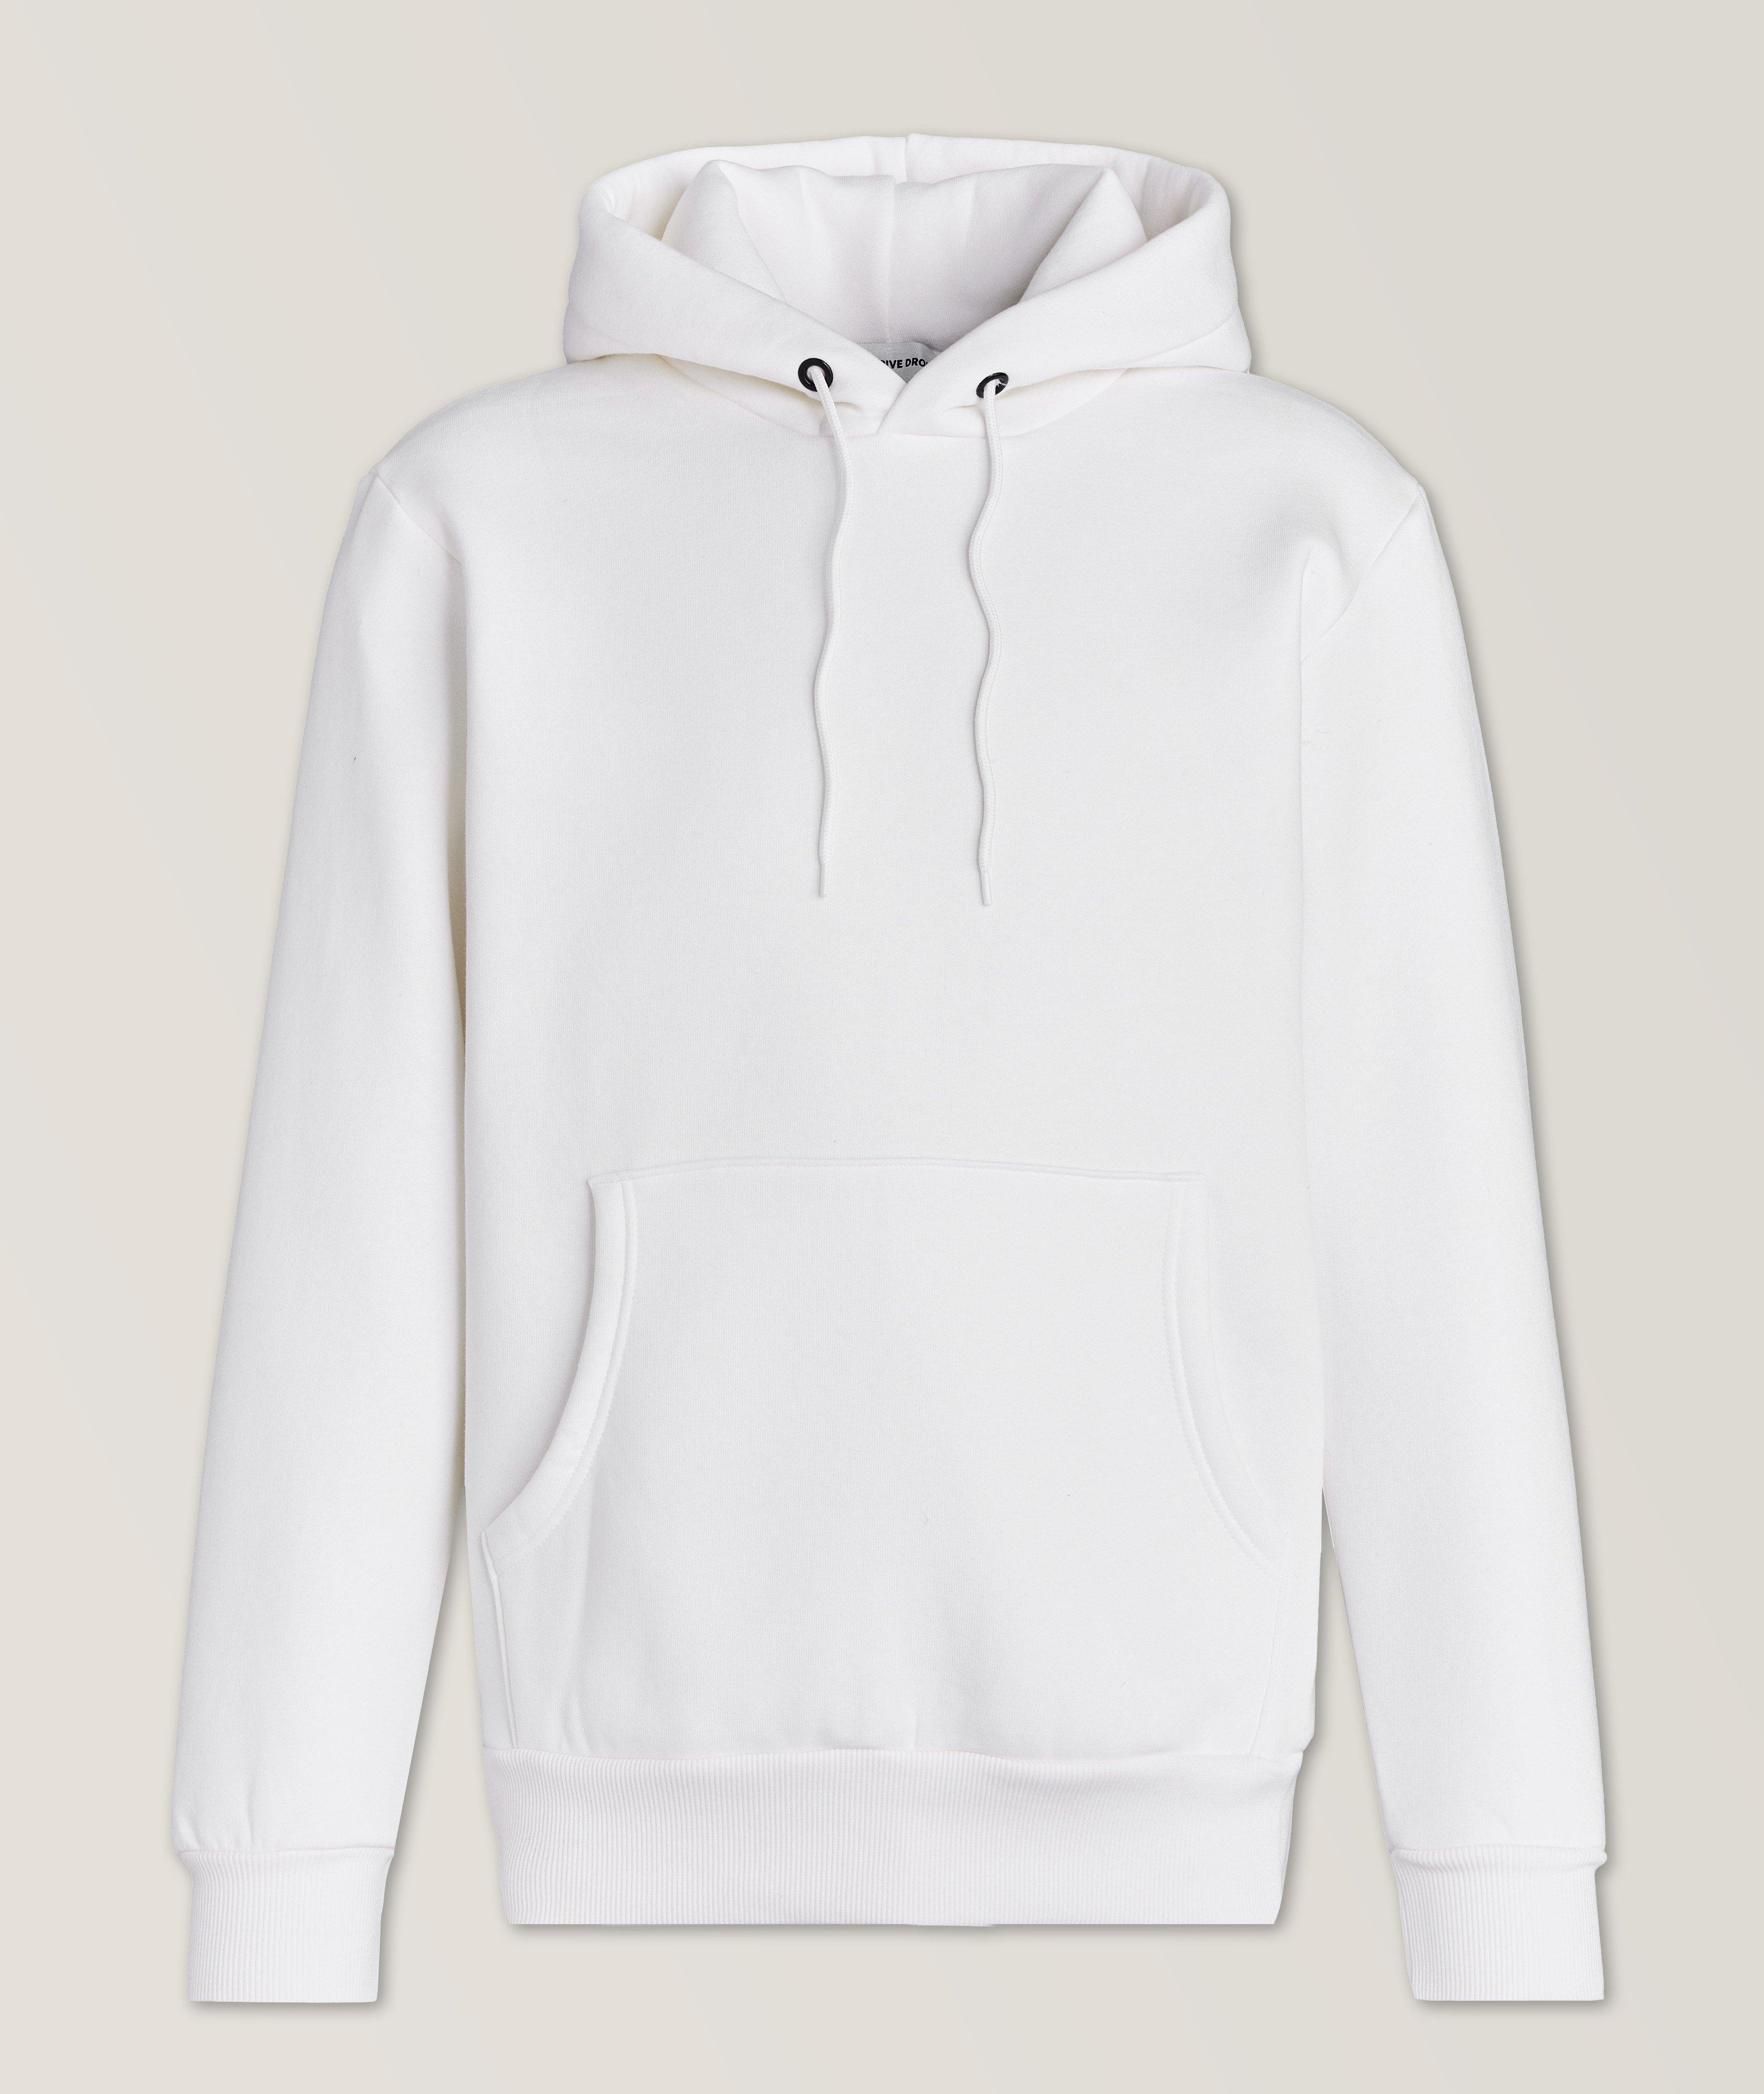 Trere Print Hooded Sweater image 1